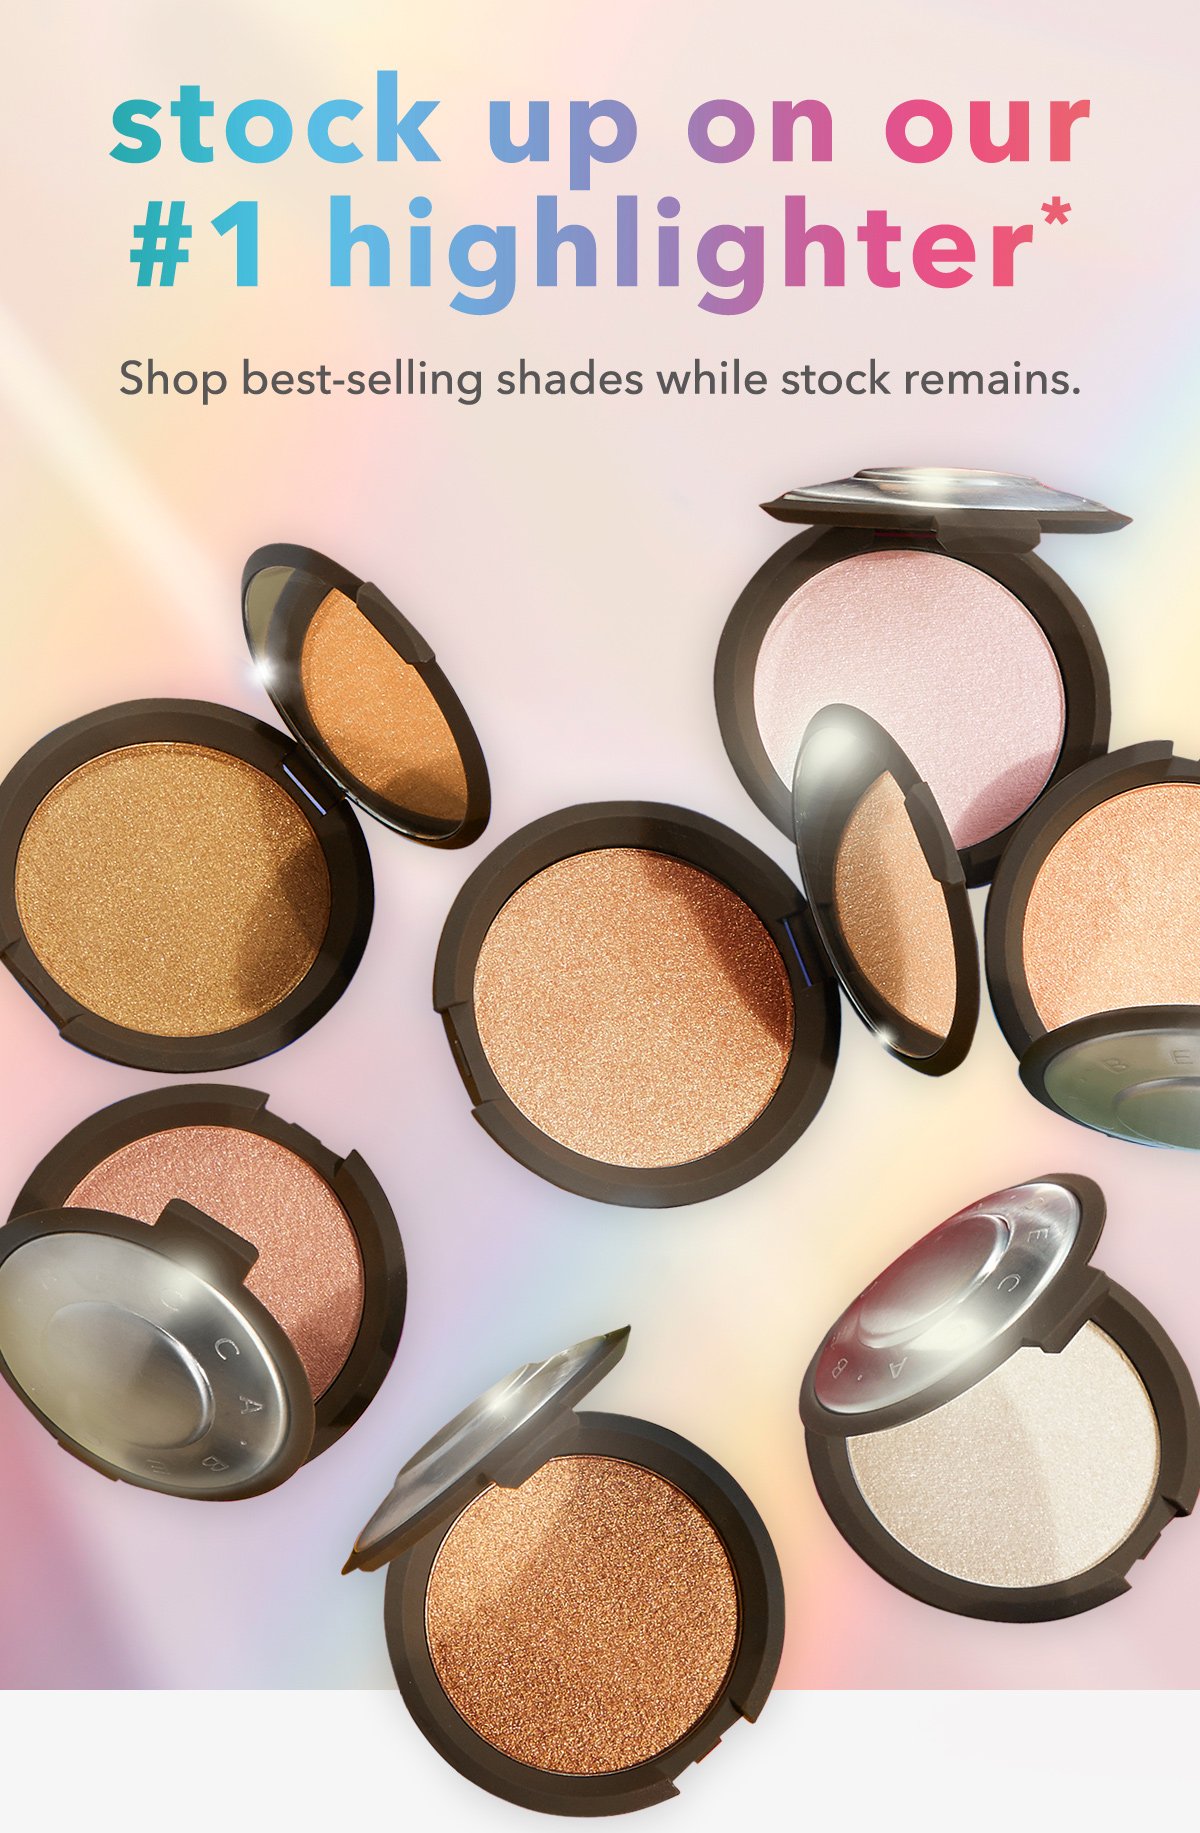 stock up on our #1 highlighter | Shop best-selling shades while stock remains.